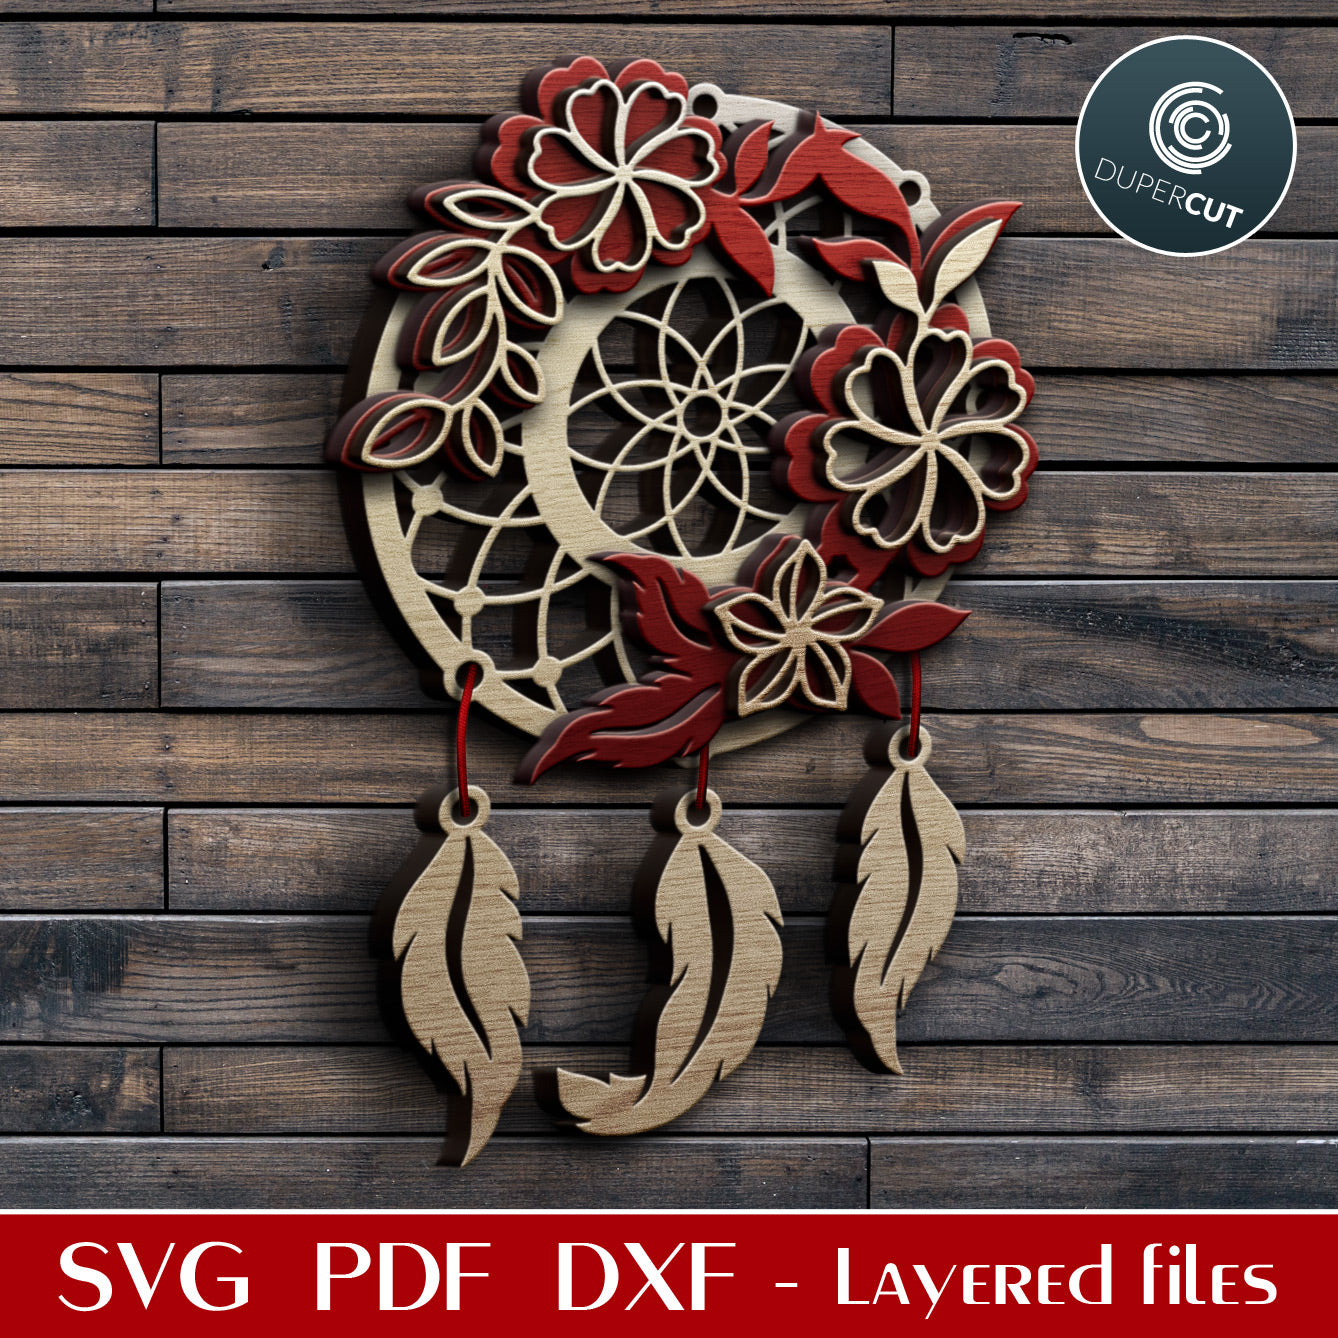 Floral dreamcatcher - layered cutting template - SVG PDF DXF vector files for laser cutting with Glowforge, Cricut, Silhouette Cameo, CNC plasma machines